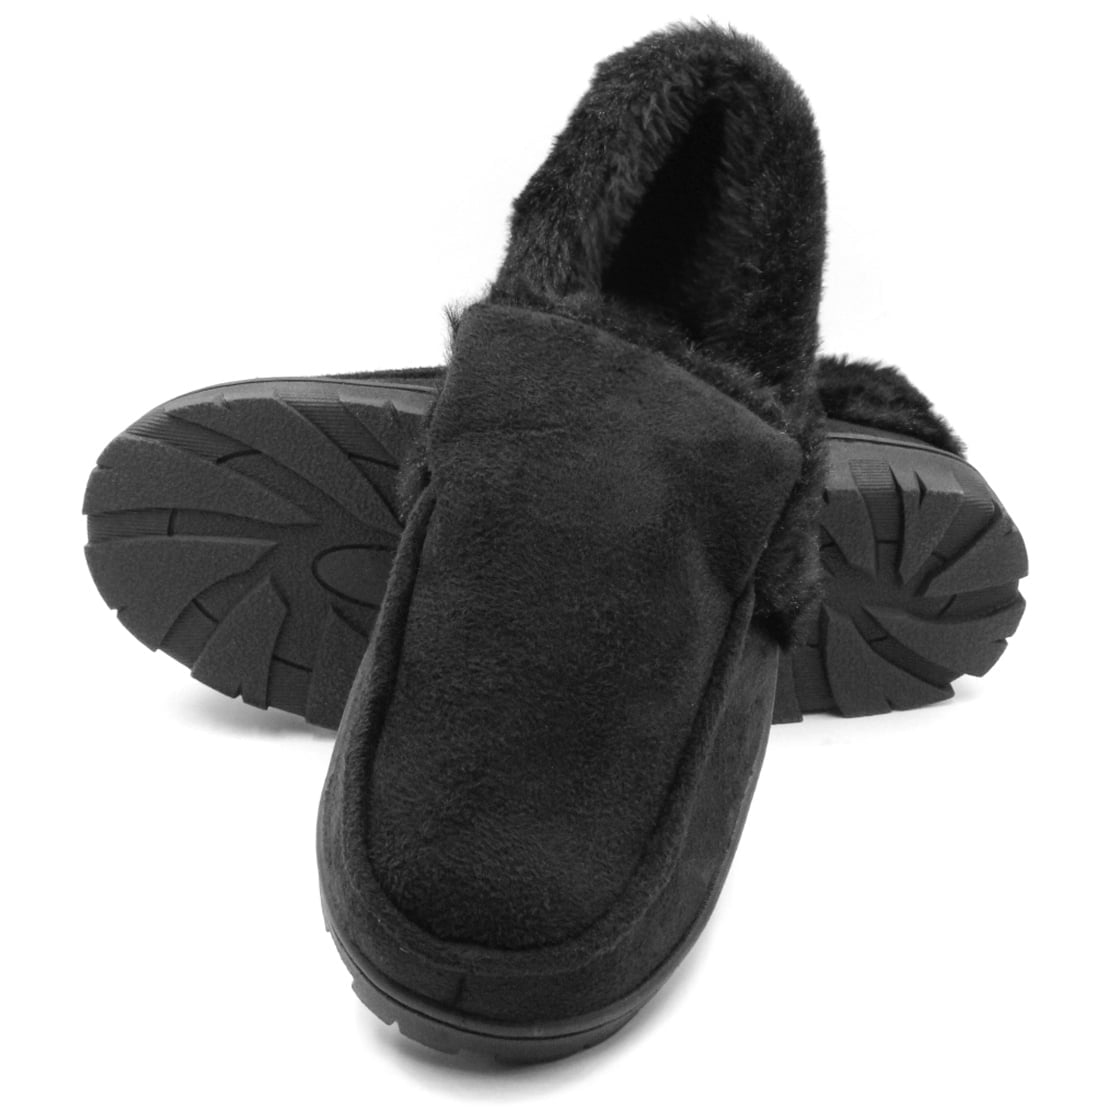 LAVRA Women's Slippers Faux Fur Lined Suede Moccasin House Shoes ...